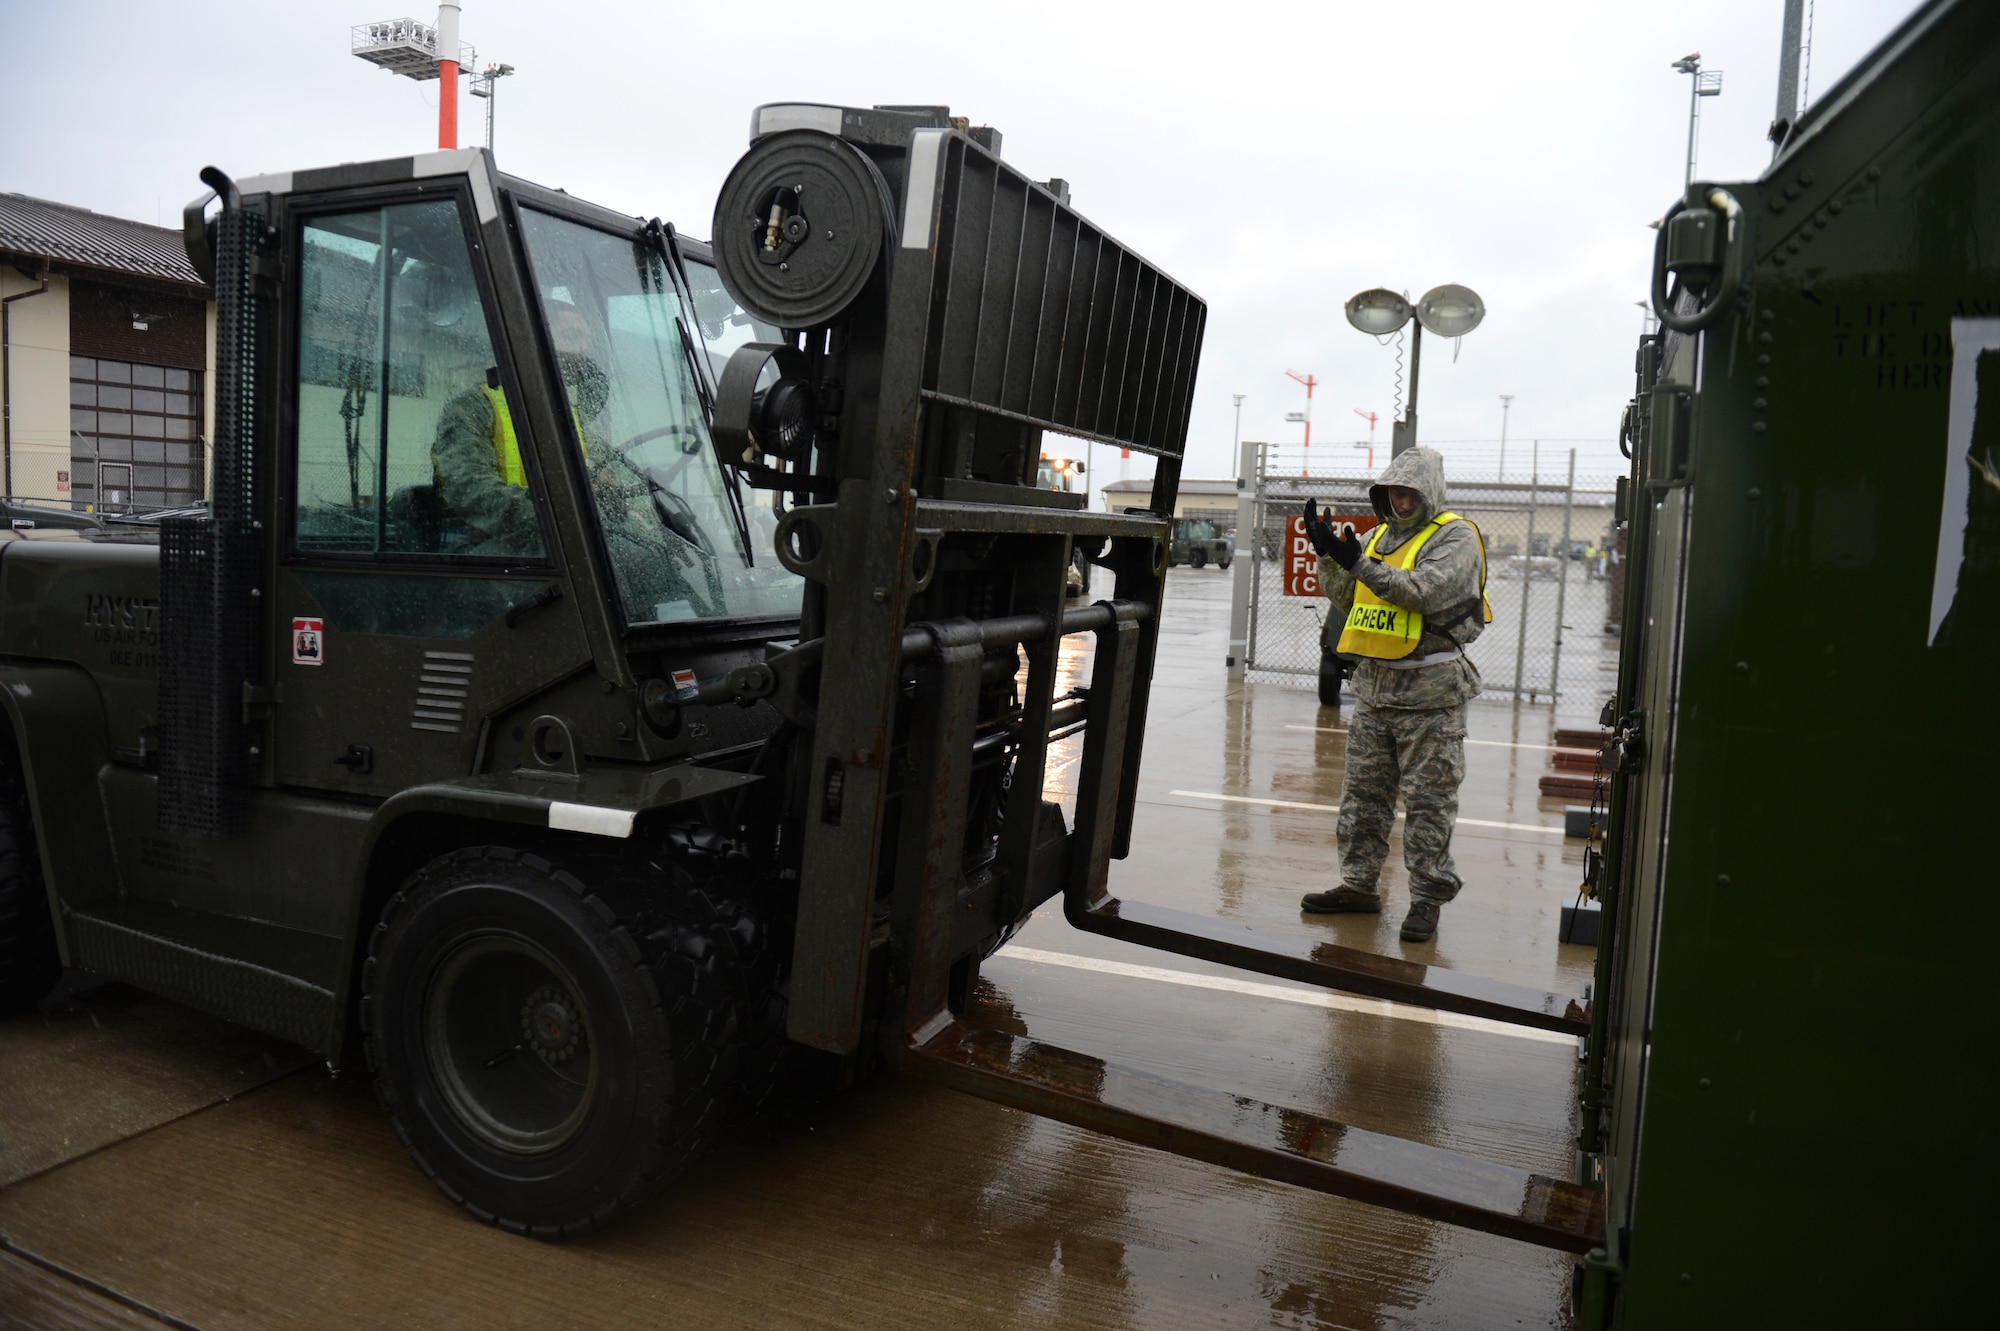 SPANGDAHLEM AIR BASE, Germany – U.S. Air Force Senior Airman Ricky Rivers, 52nd Logistics Readiness Squadron vehicle maintainer from Louvale, Ga., guides a forklift on the flightline Dec. 27, 2012. Airmen will measure and weigh the cargo before it is loaded onto its designated plane. The cargo will accompany the 480th Fighter Squadron to Nellis Air Force Base for Red Flag, an advanced aerial combat training exercise. (U.S. Air Force photo by Airman 1st Class Gustavo Castillo/Released)